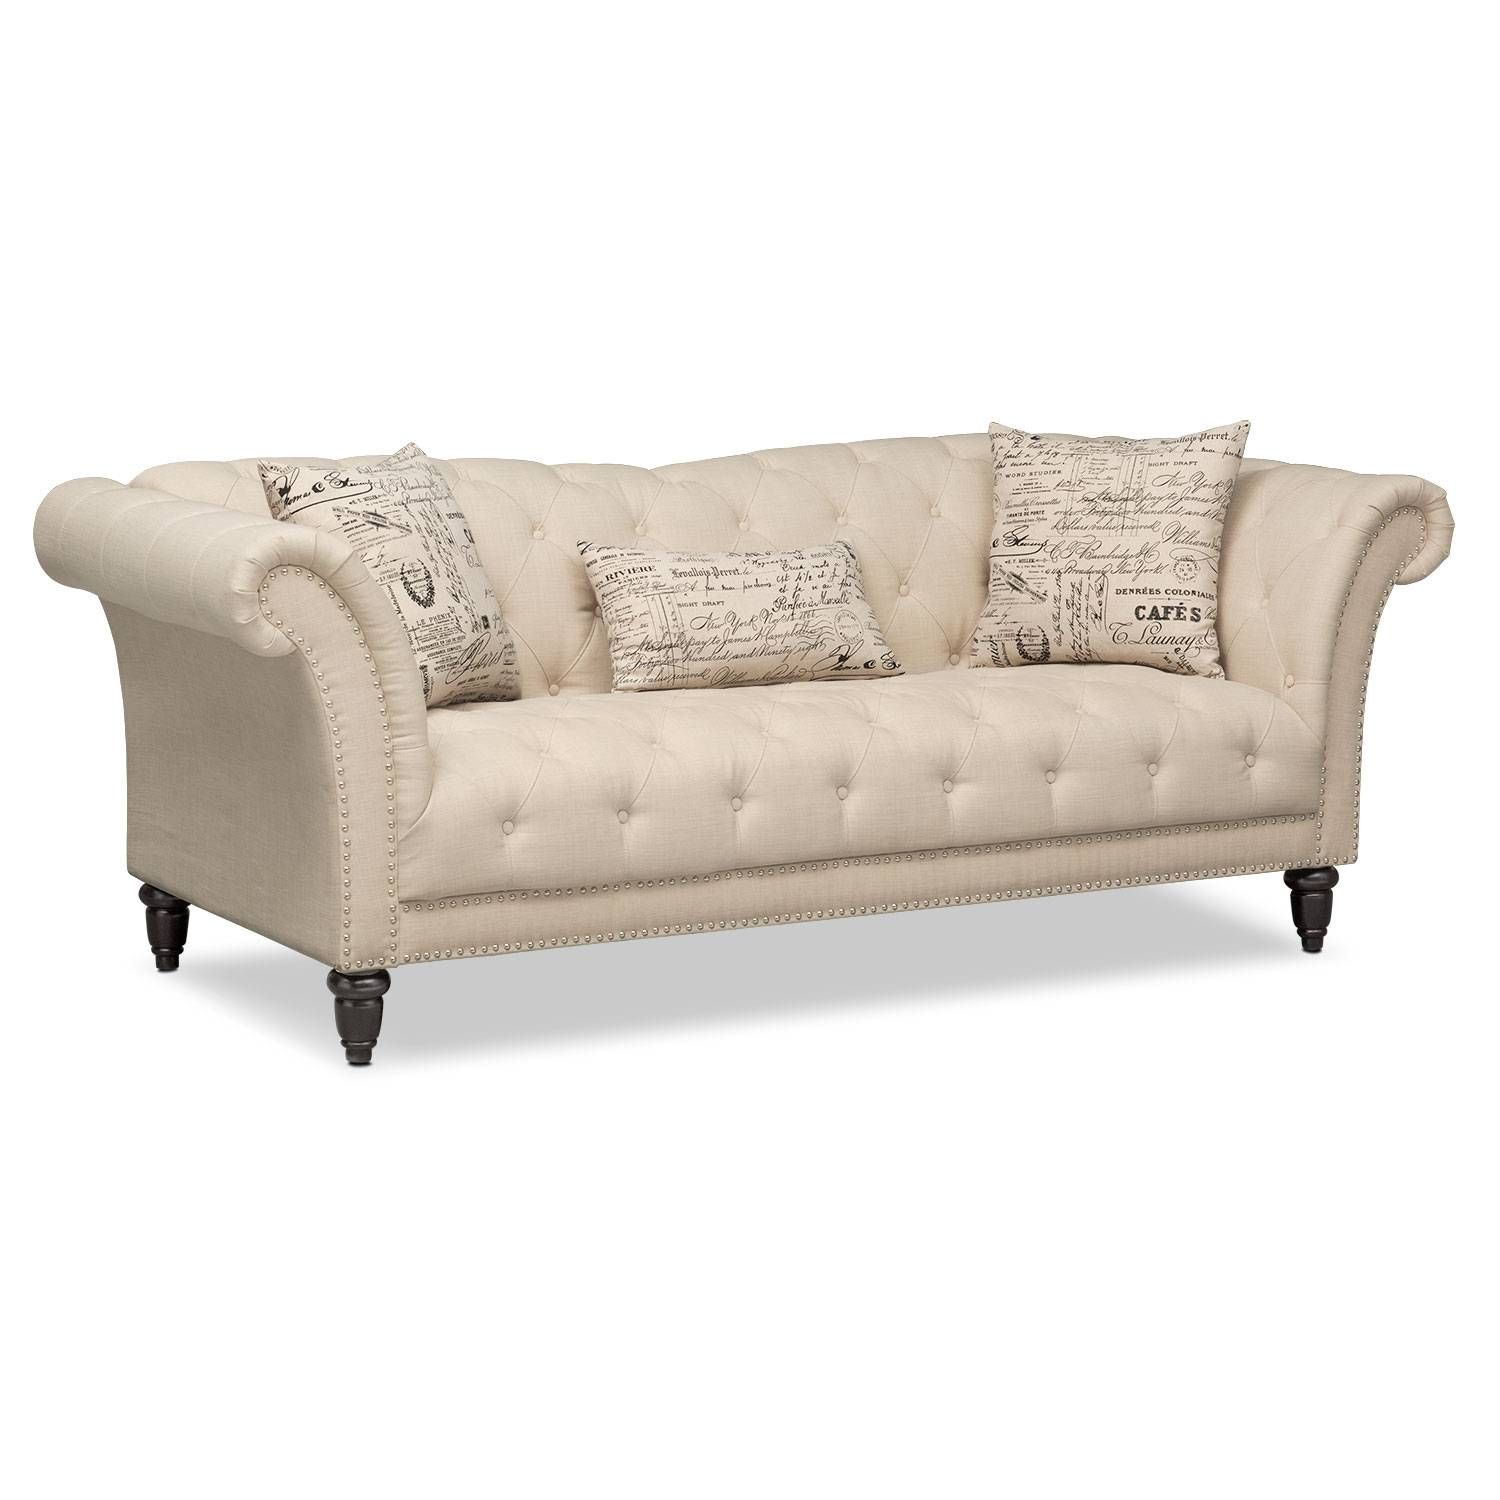 Marisol Sofa – Beige | Value City Furniture Pertaining To Value City Sofas (View 2 of 25)